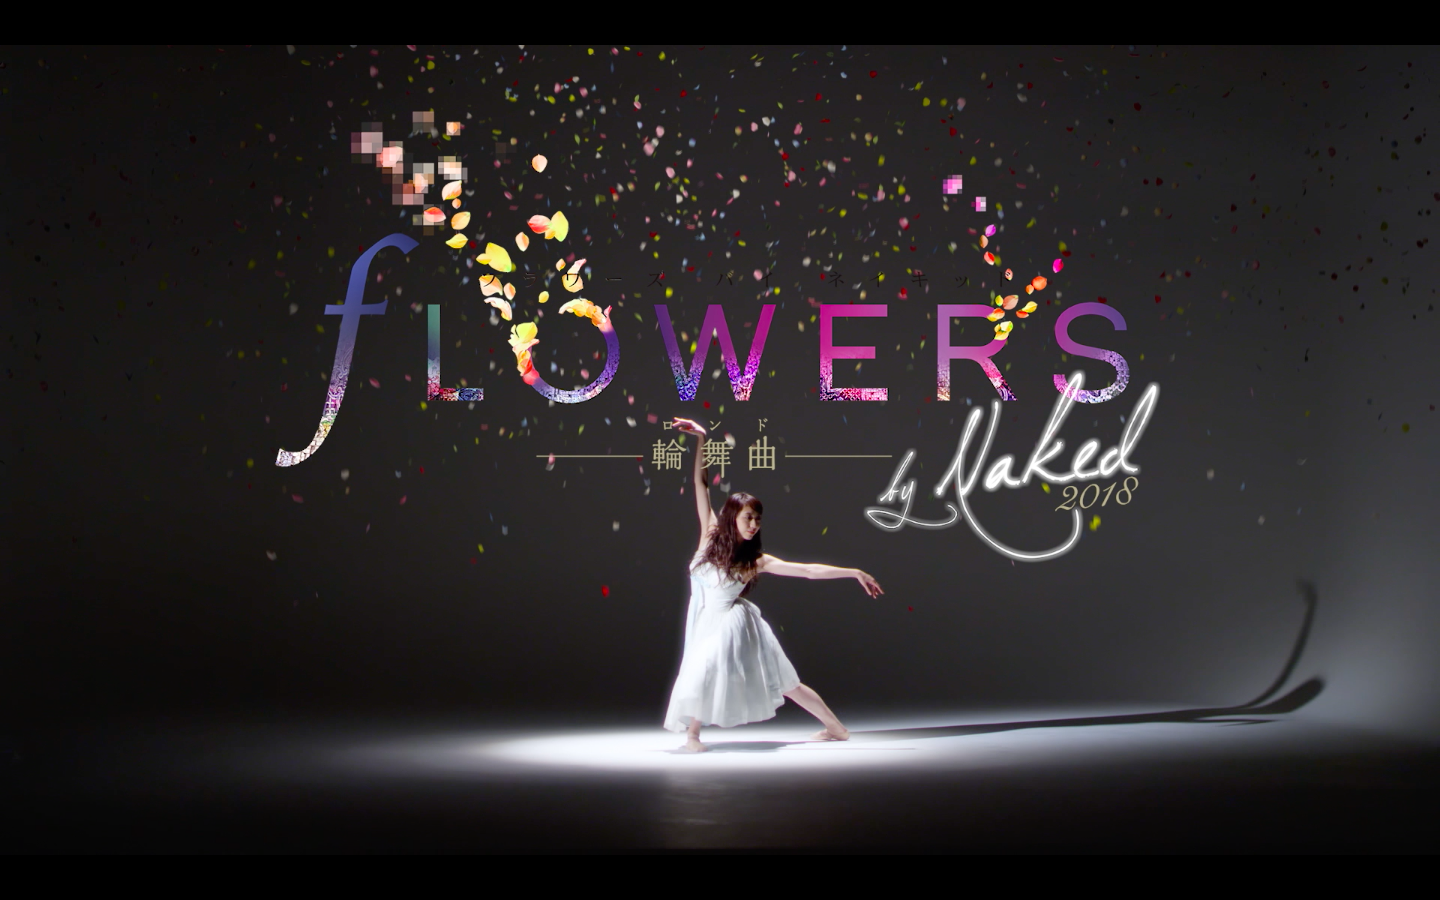 FLOWERS by NAKED 2018 輪舞曲 最新ムービー公開 NAKED FLOWERS 2021 −桜− 世界遺産・二条城